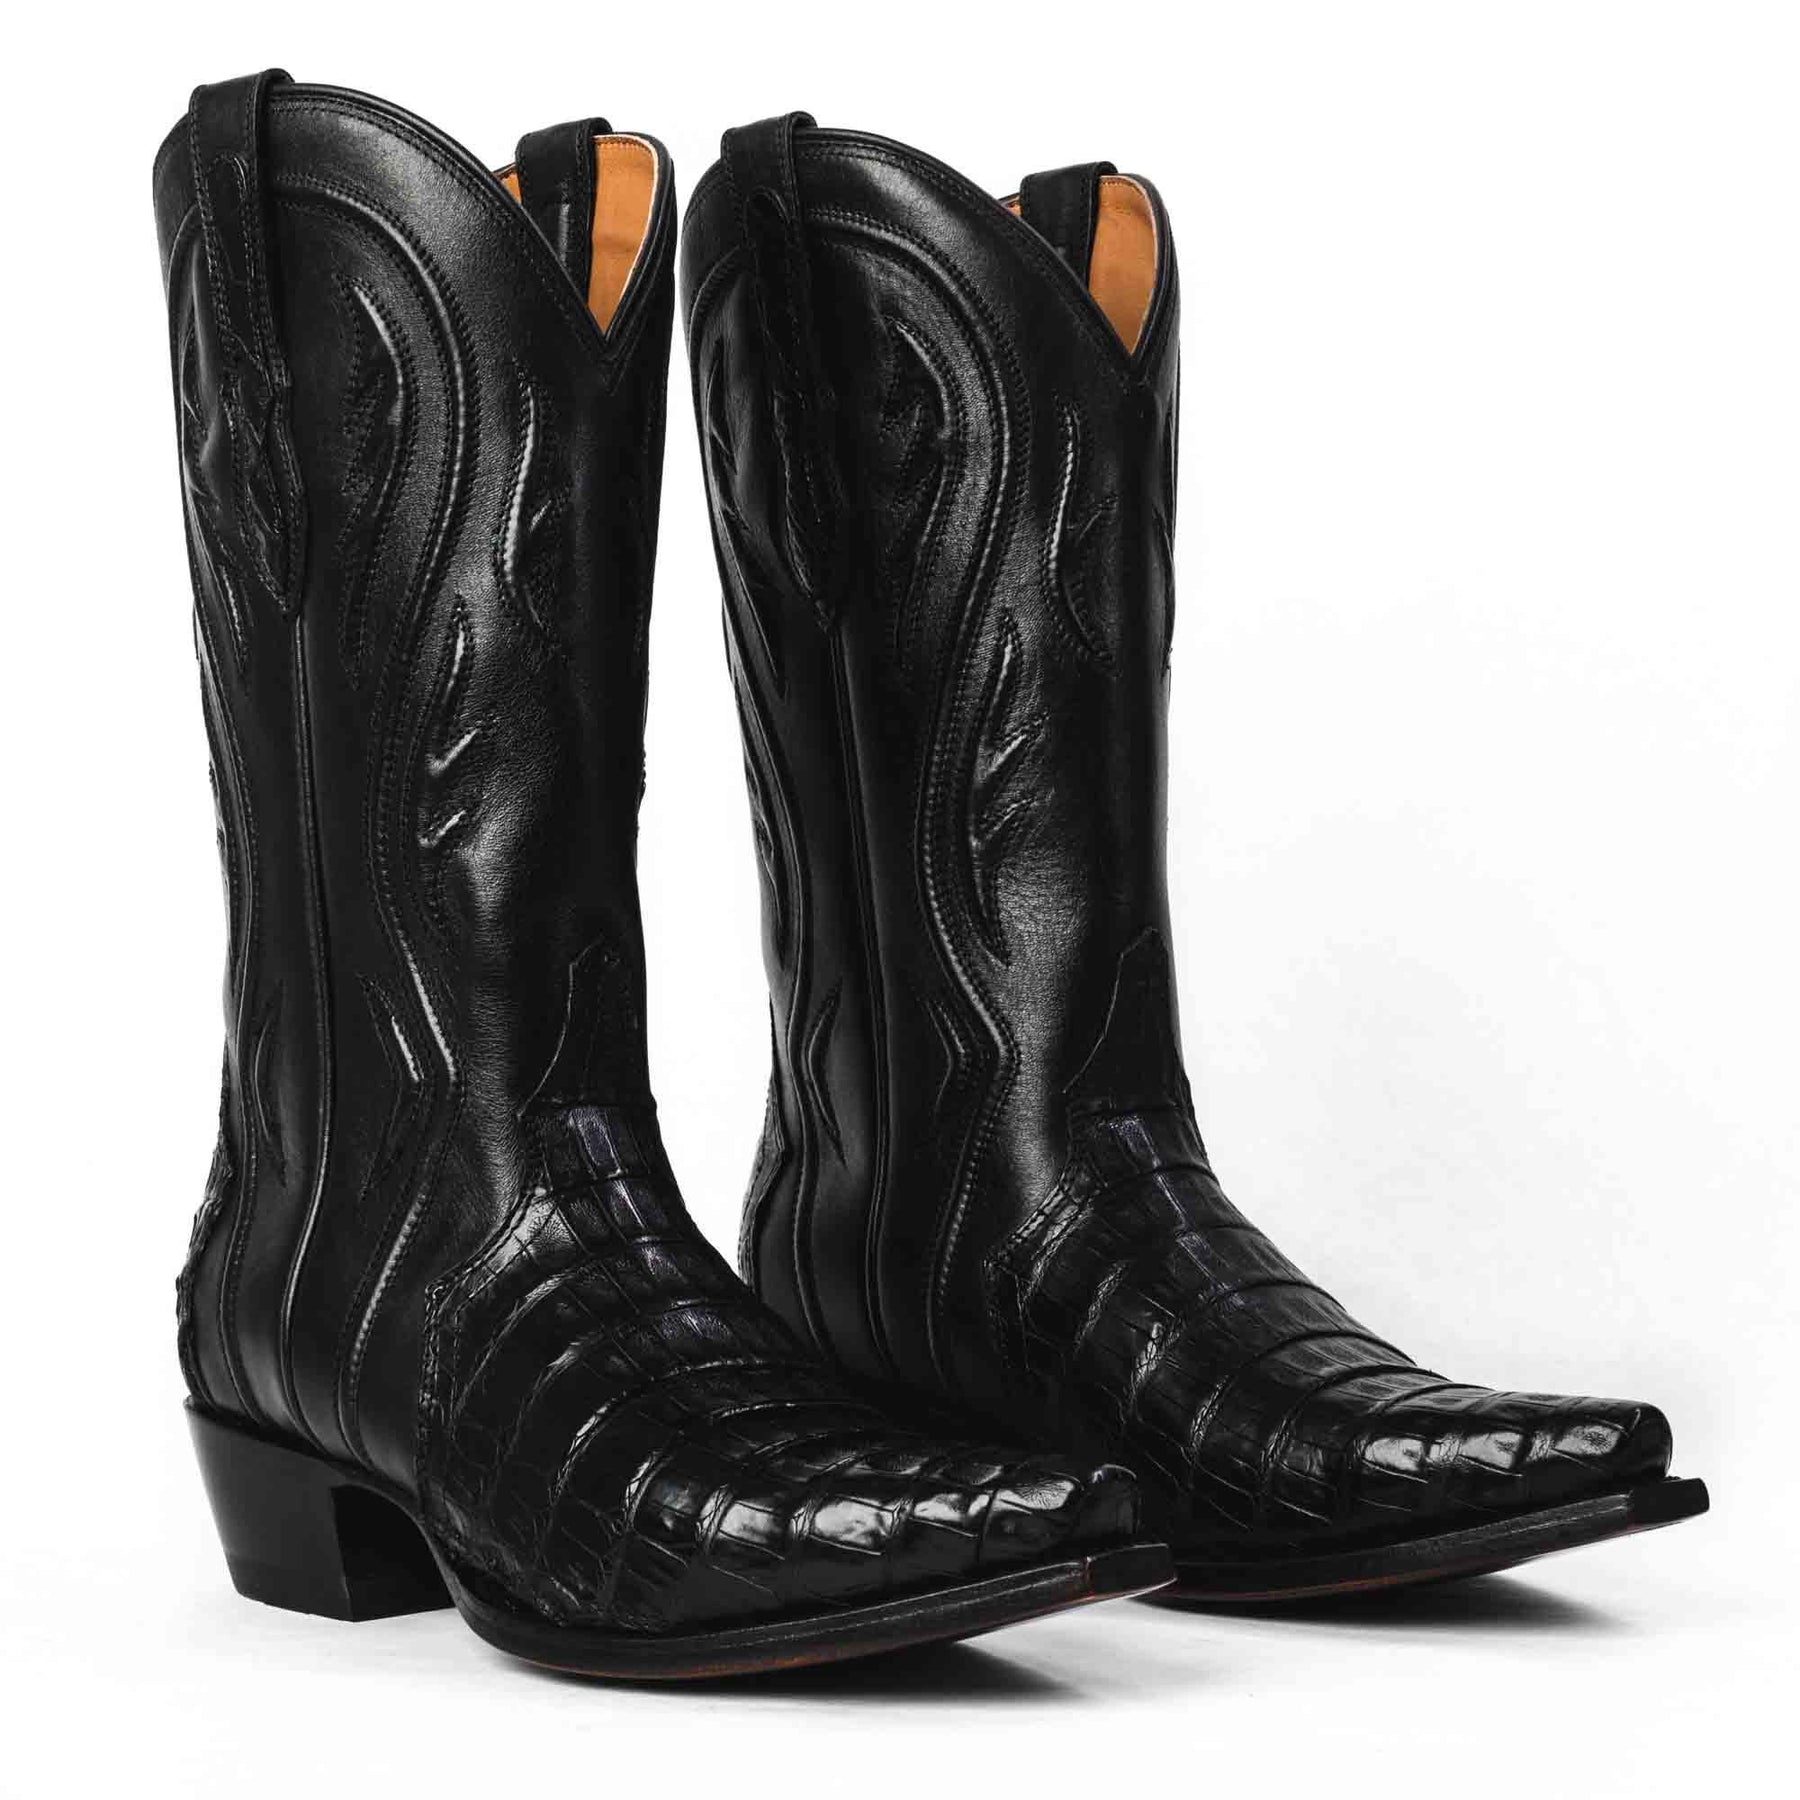 Snip-Toe Caiman Tail Cowgirl Boot by RUJO